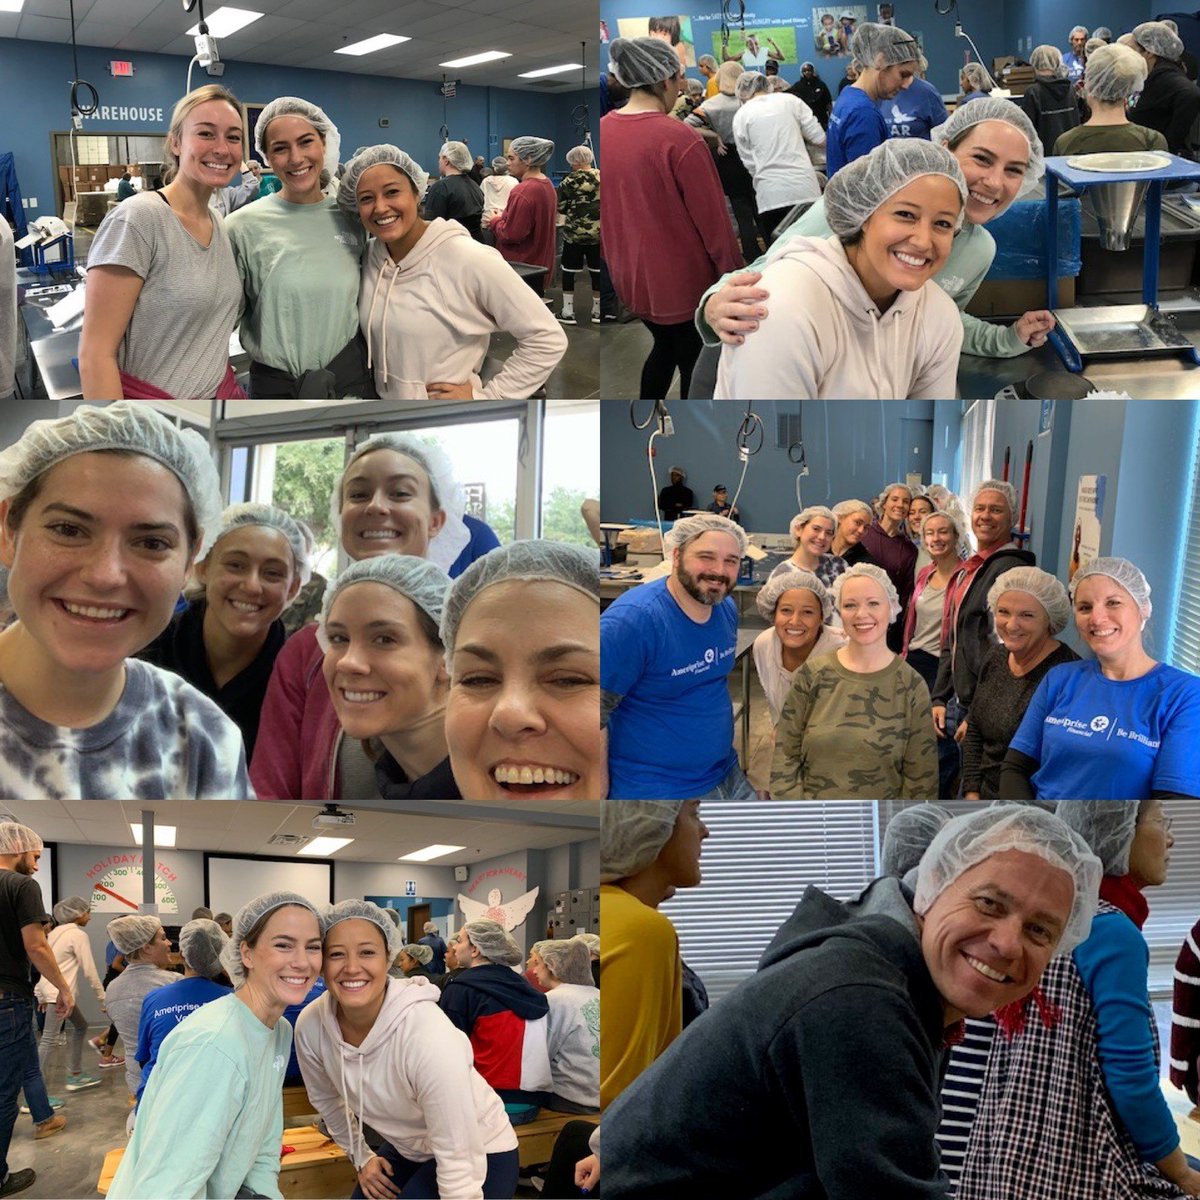 Our Inside Sales Team from Dallas volunteered with Feed My Starving Children to help hand-pick food & ship to partners around the world. We are incredibly proud of our team to participate in a very worthy cause and Sirius commitment to Community Service Core Value! #wearesirius